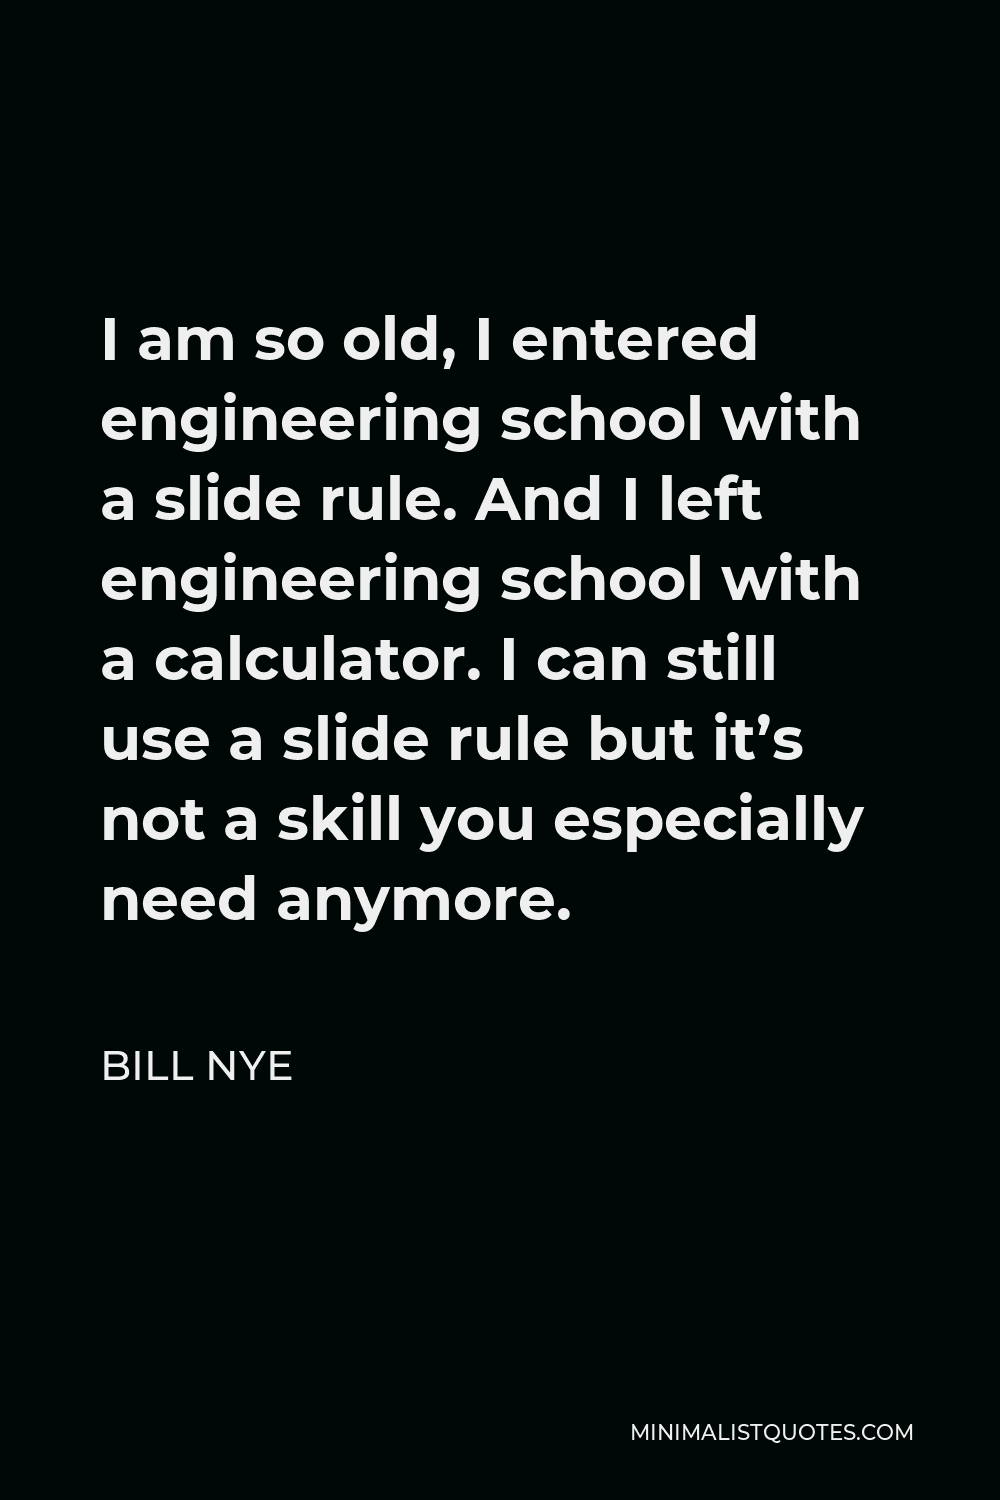 Bill Nye Quote - I am so old, I entered engineering school with a slide rule. And I left engineering school with a calculator. I can still use a slide rule but it’s not a skill you especially need anymore.